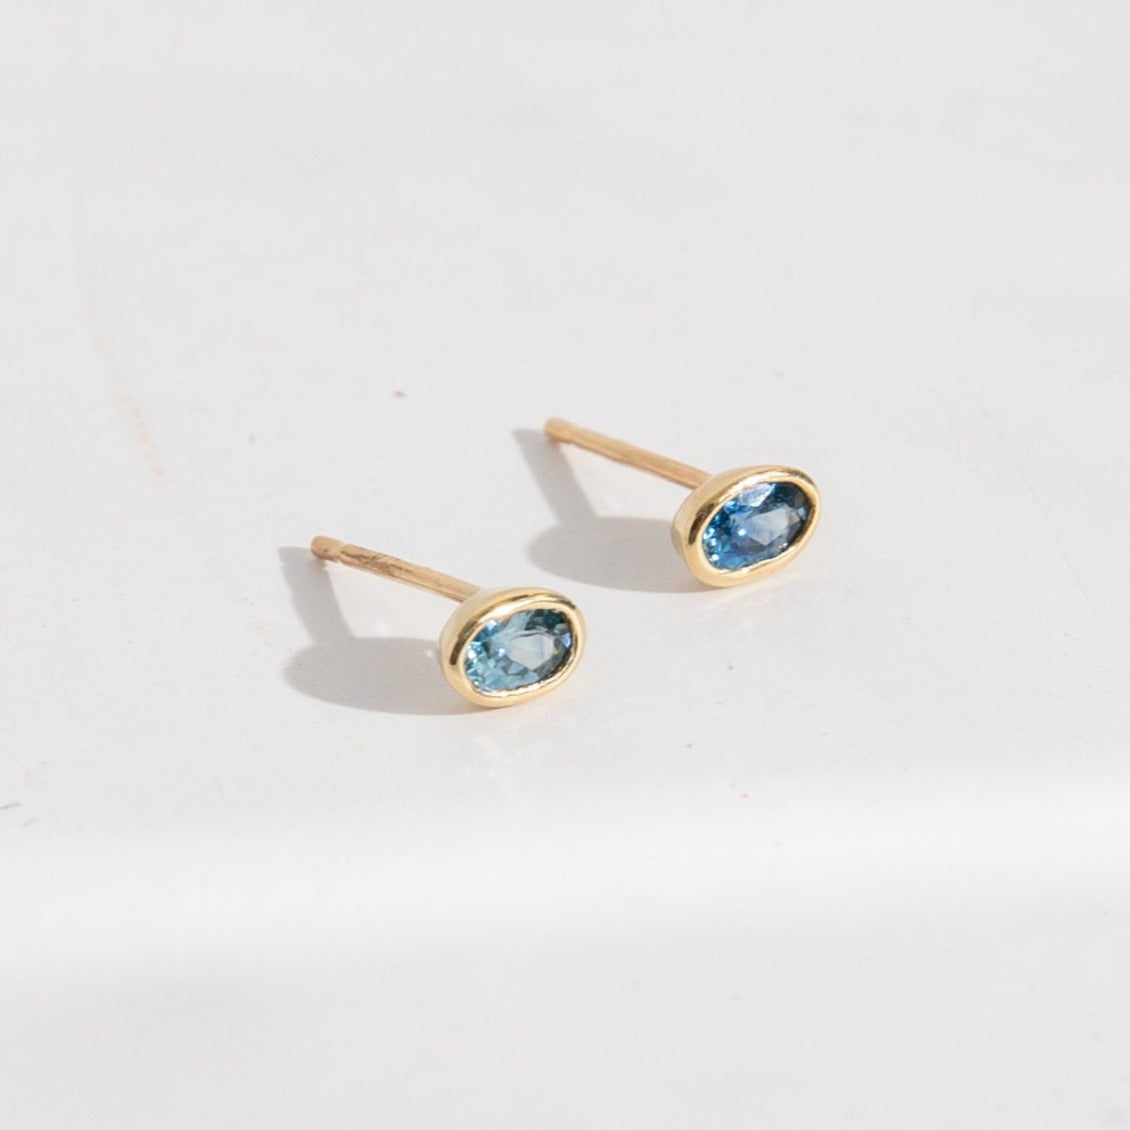 Ana Simple Earrings 14k Yellow Gold Set With Blue Sapphires By SHW Fine Jewelry NYC